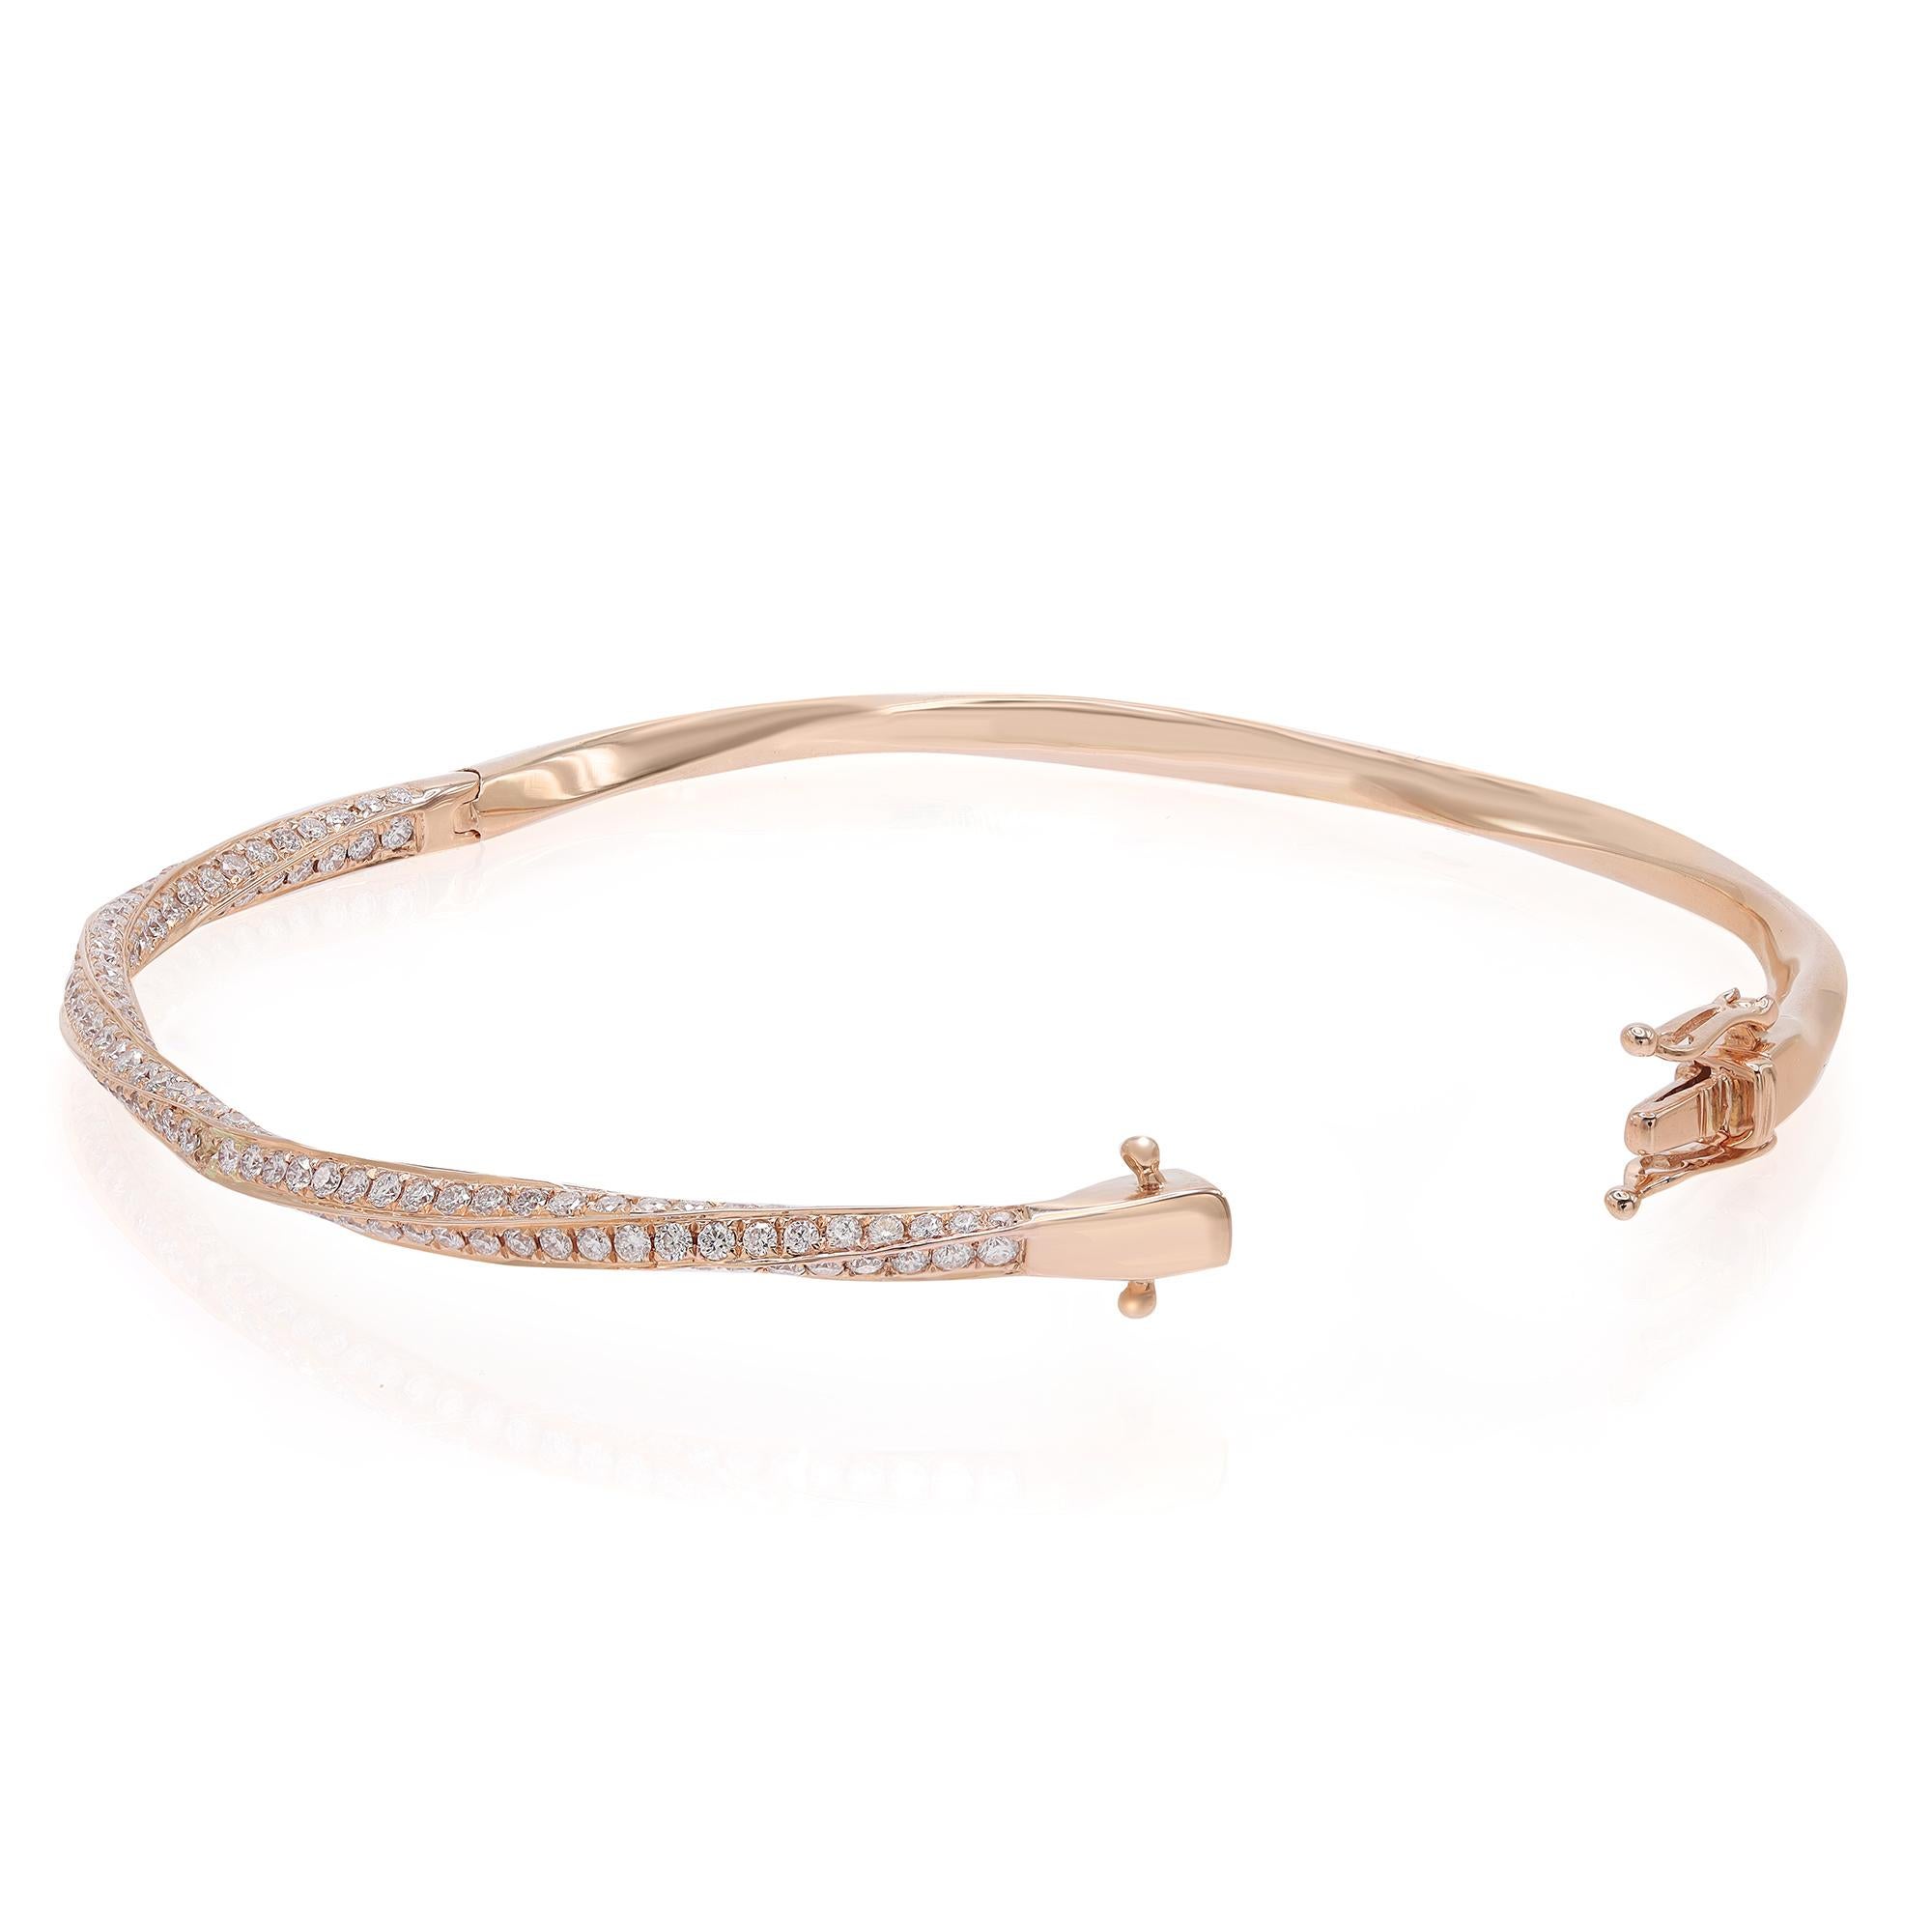 Rachel Koen Pave Set Round Cut Diamond Bangle Bracelet 18K Rose Gold 2.07Cttw In New Condition For Sale In New York, NY